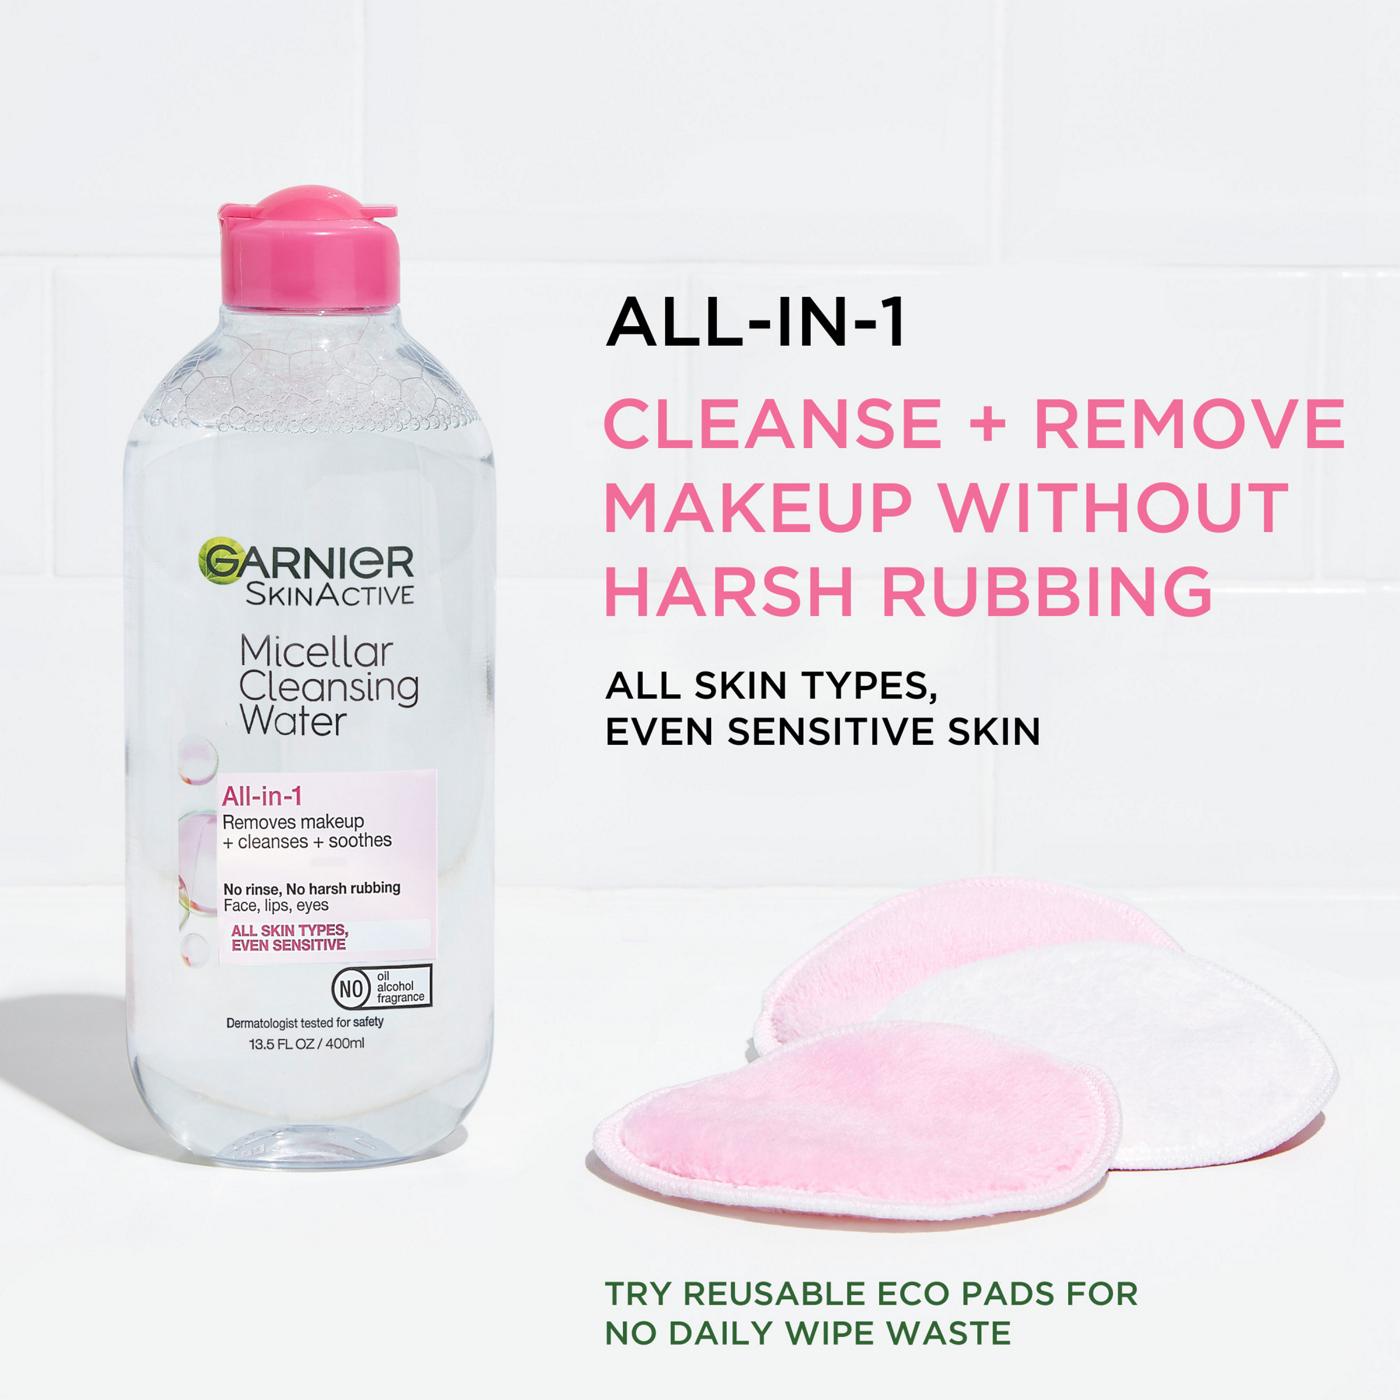 Garnier SkinActive Micellar Cleansing Water, For All Skin Types; image 4 of 11